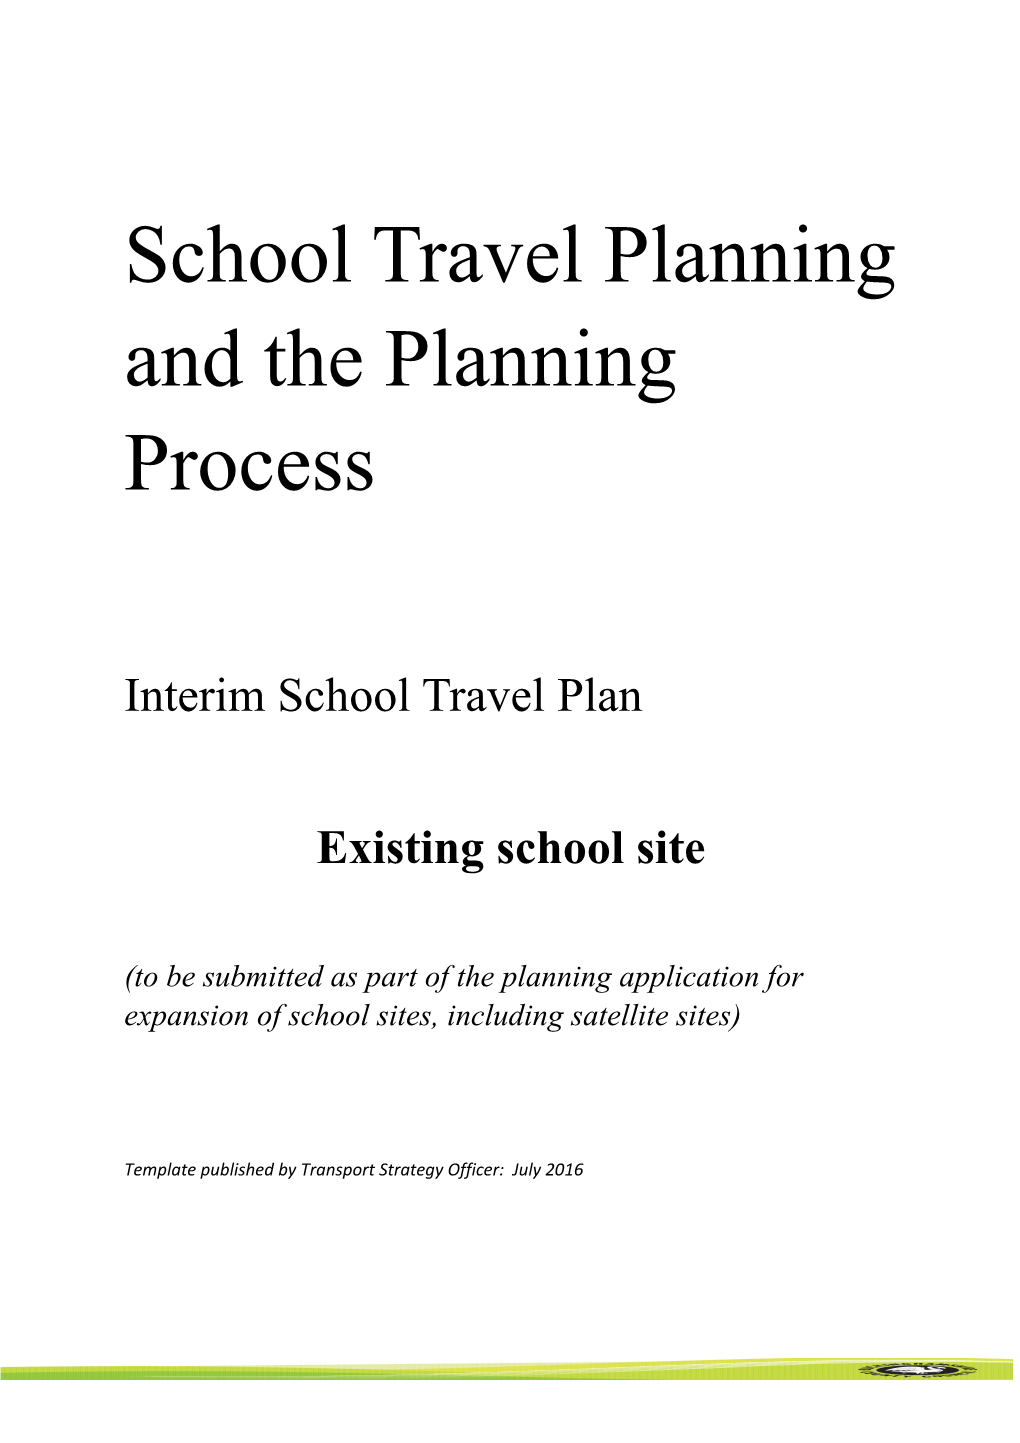 School Travel Planning and the Planning Process